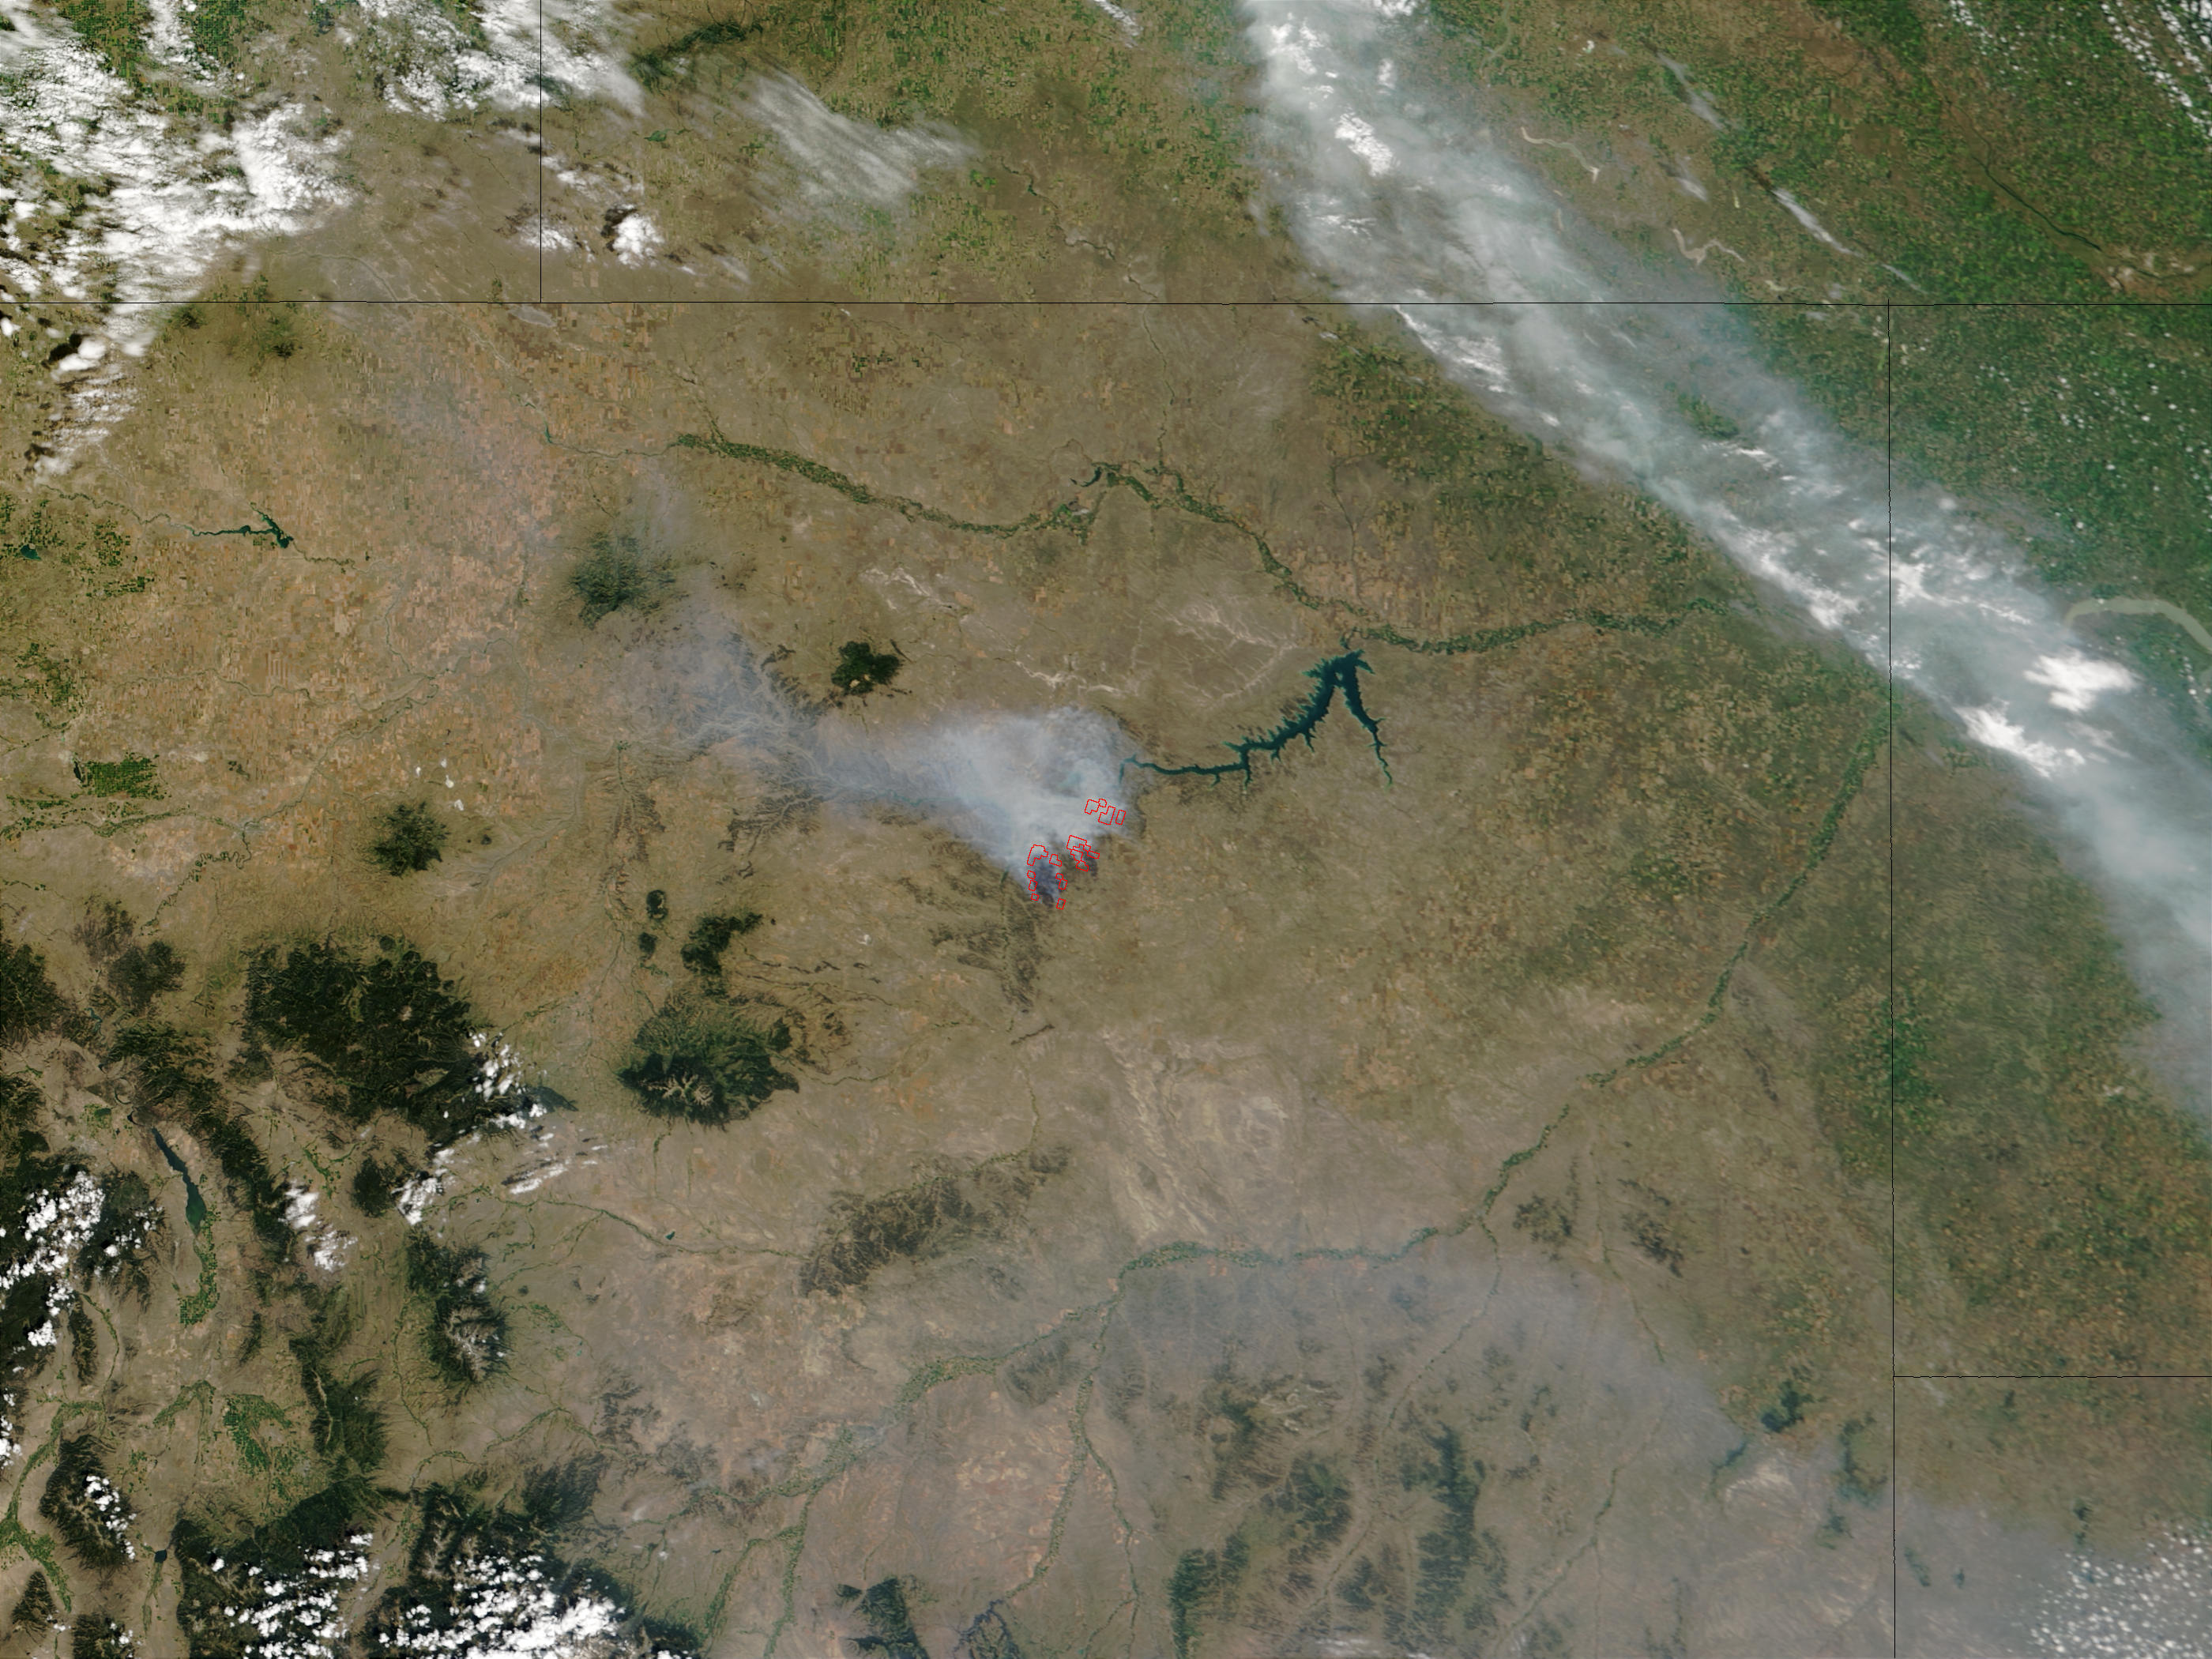 Missouri Breaks Complex Fire, Montana - related image preview